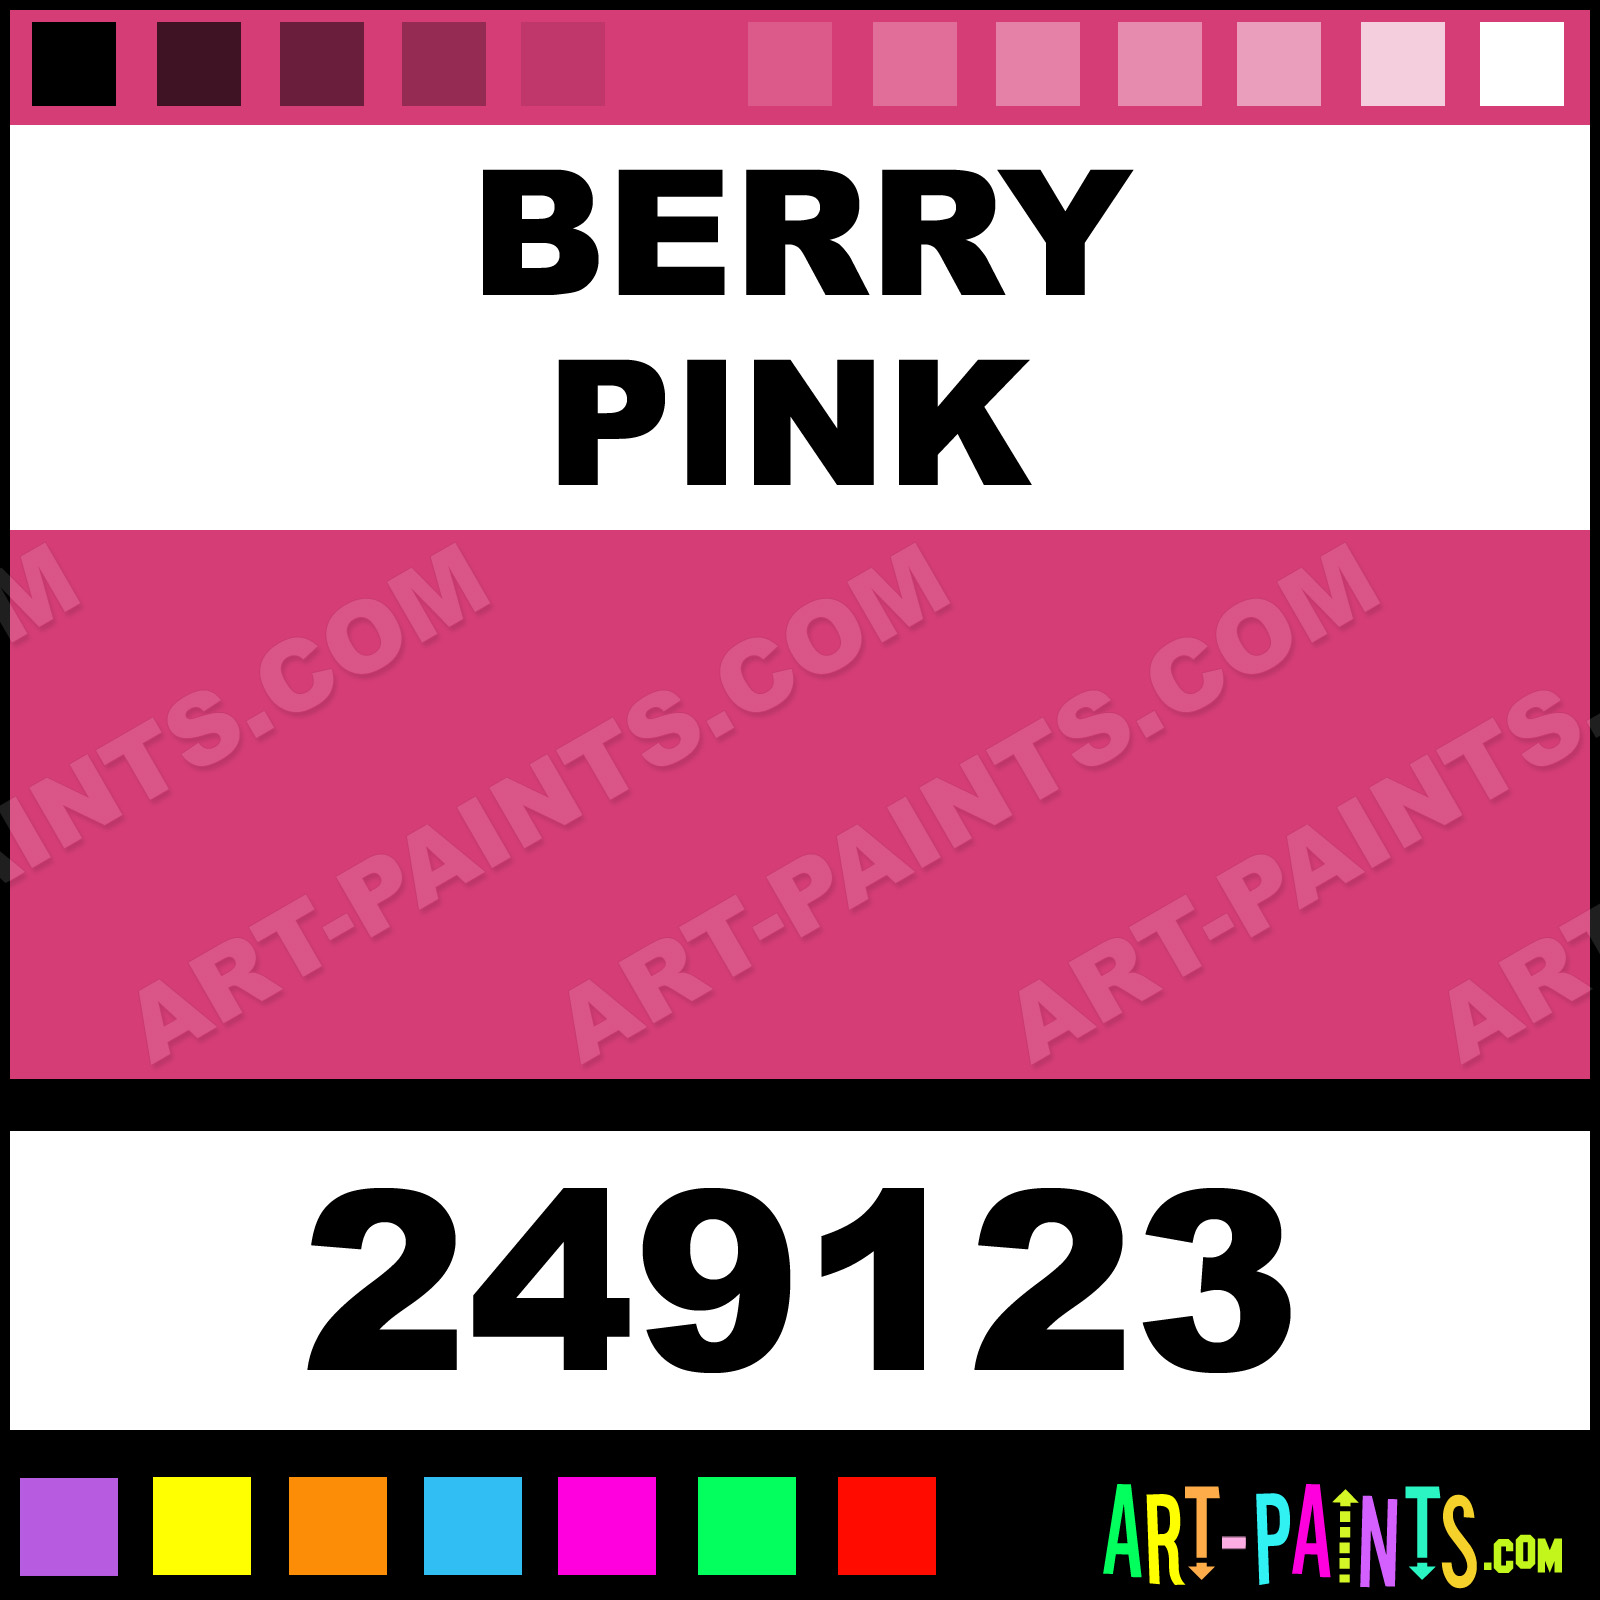 Berry Pink Ultra Cover 2x Ceramic Paints - 249123 - Berry Pink